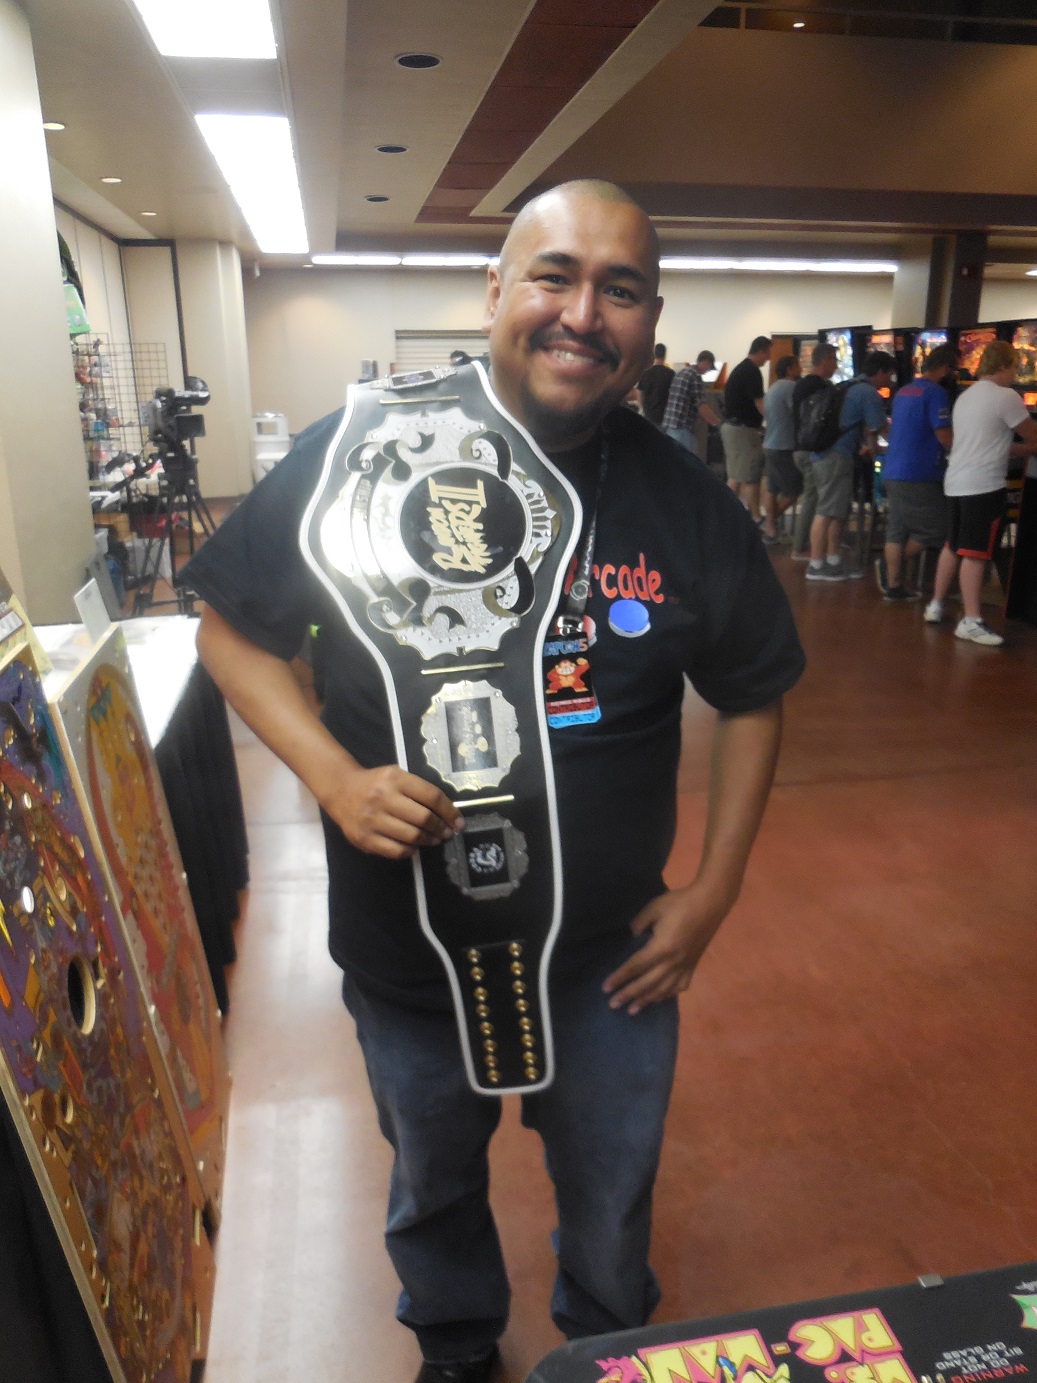 ZapCon, the only convention cool enough to give away TWO championship belts. This one was for the winner of the Random Fighters arcade challenge, where competitors tested their mettle on Street Fighter games. It was sponsored by This Old Arcade.